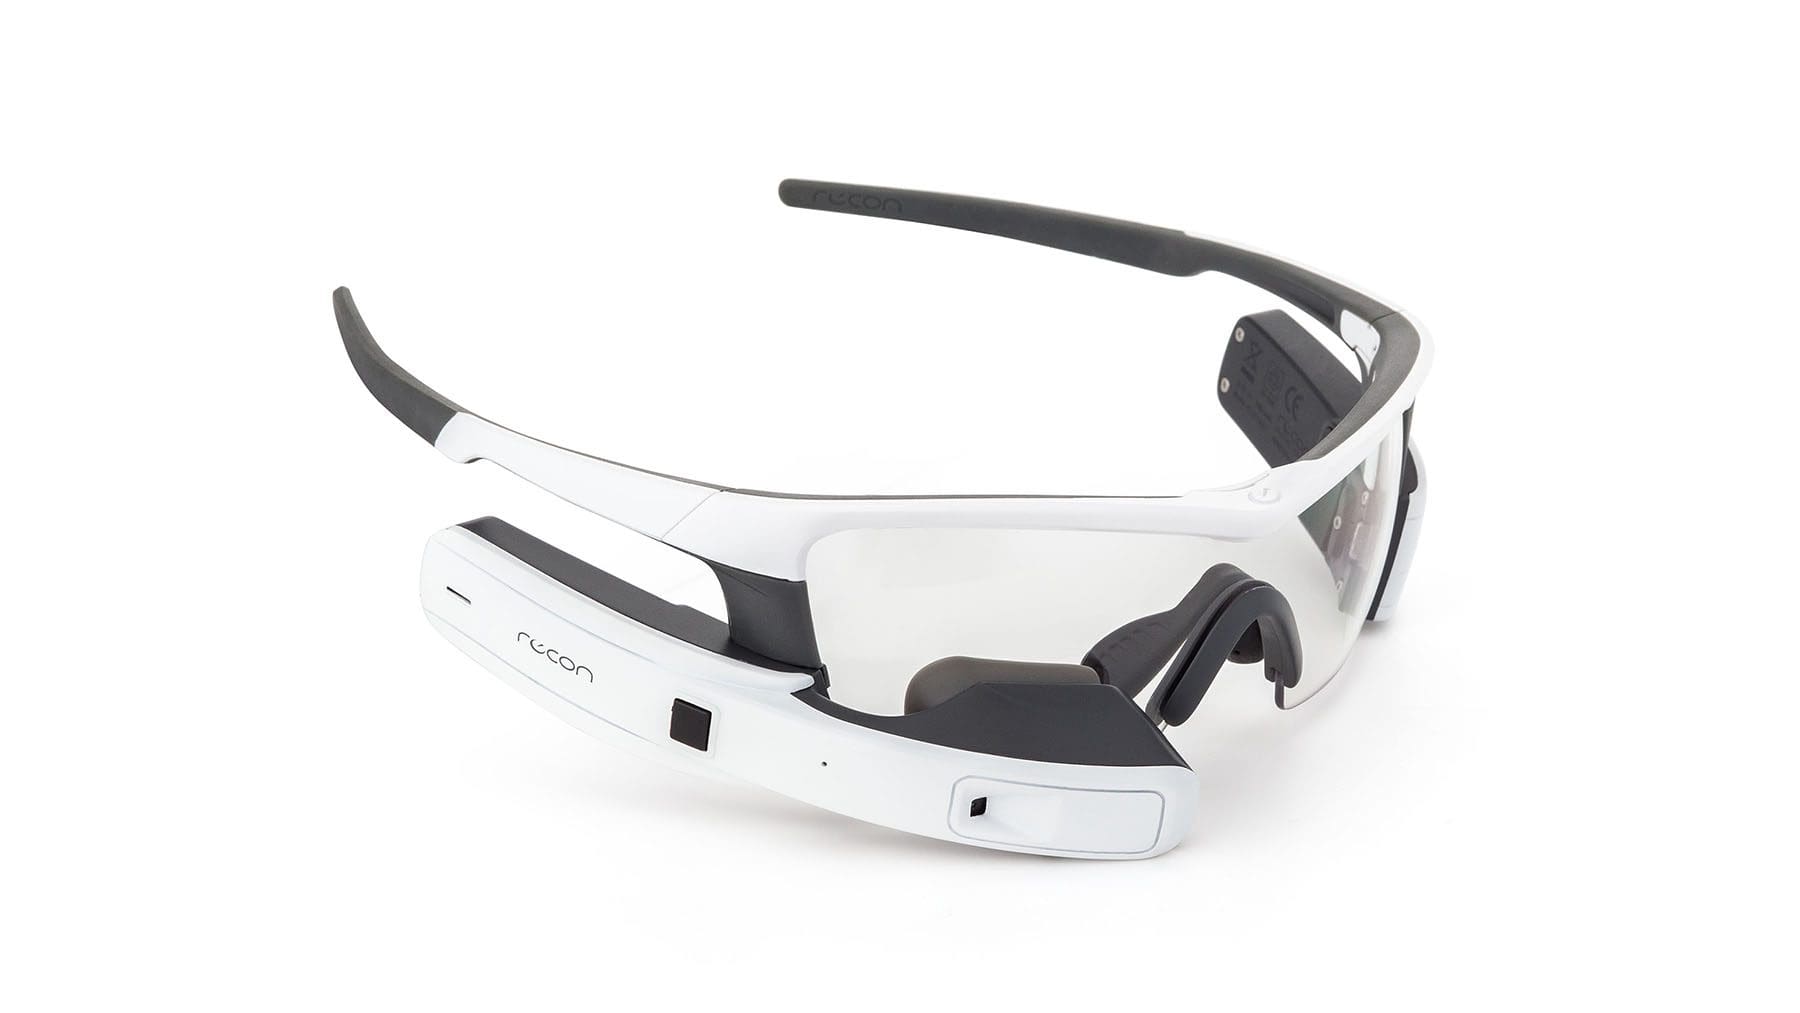 Recon Instruments Launches Recon Jet Smart Eyewear for Your Active Lifestyle